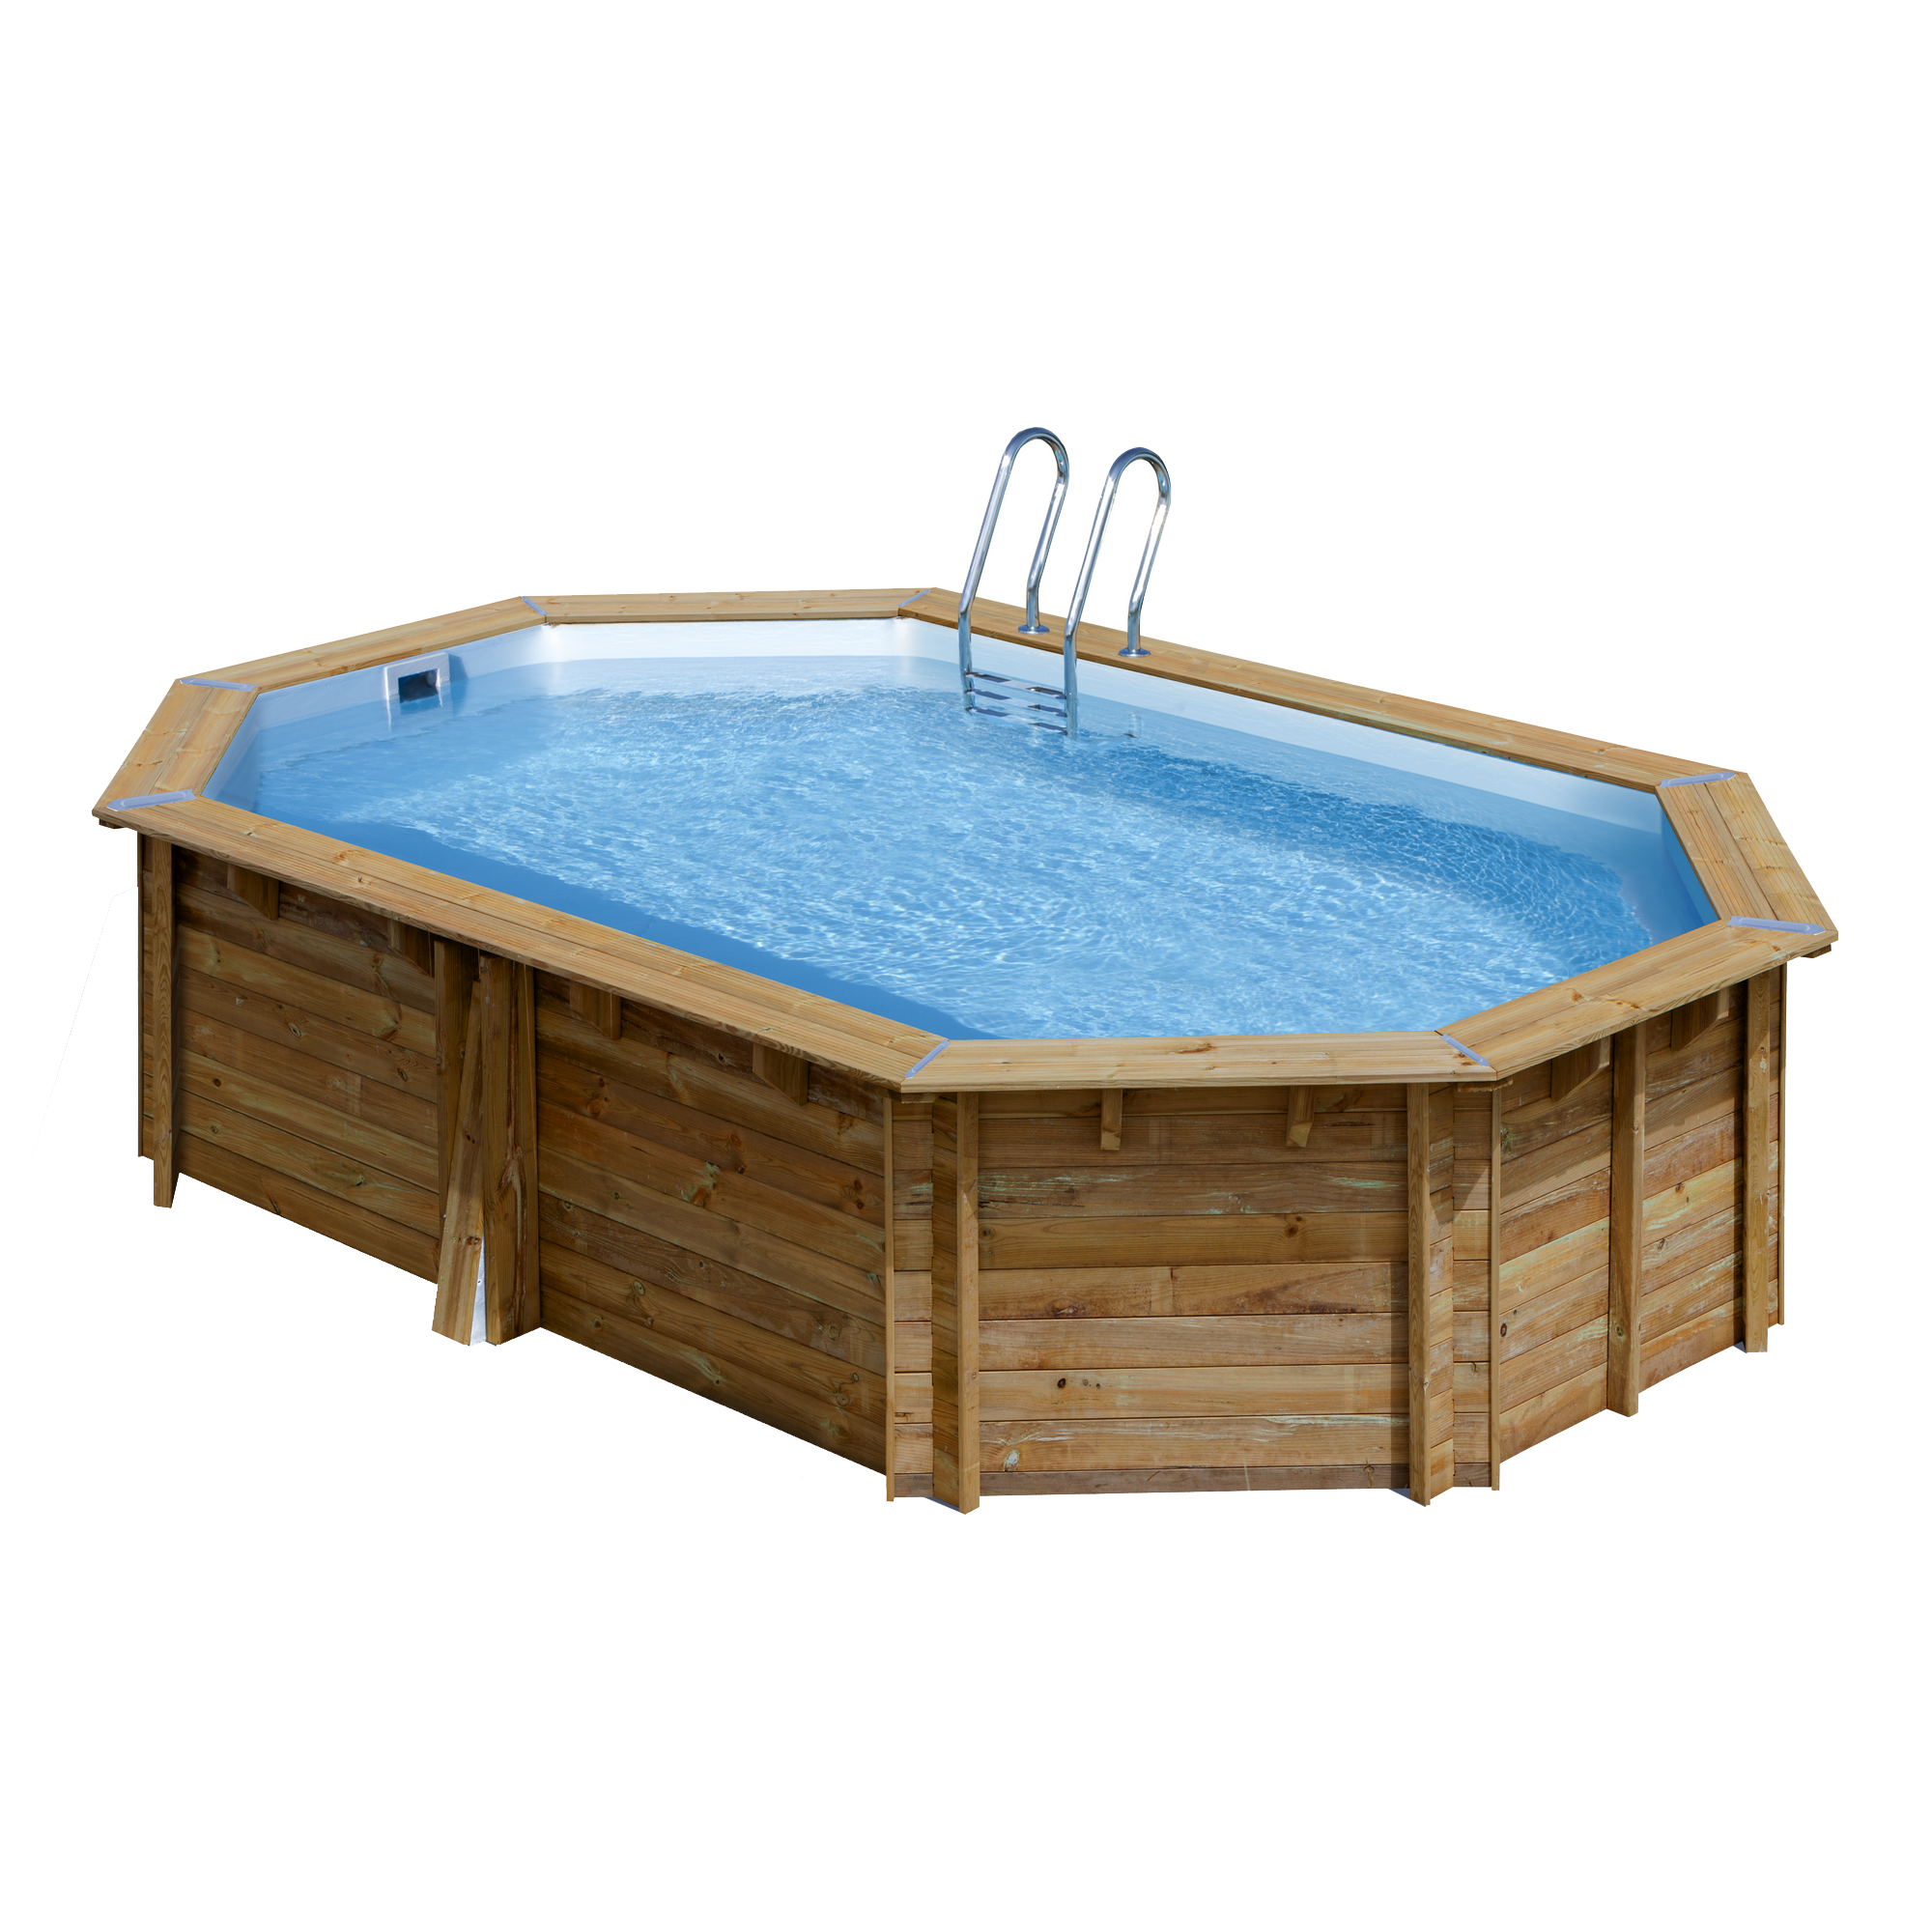 Echtholzpool 'Cannelle' holzfarben/weiß oval 551 x 351 x 119 cm + product picture